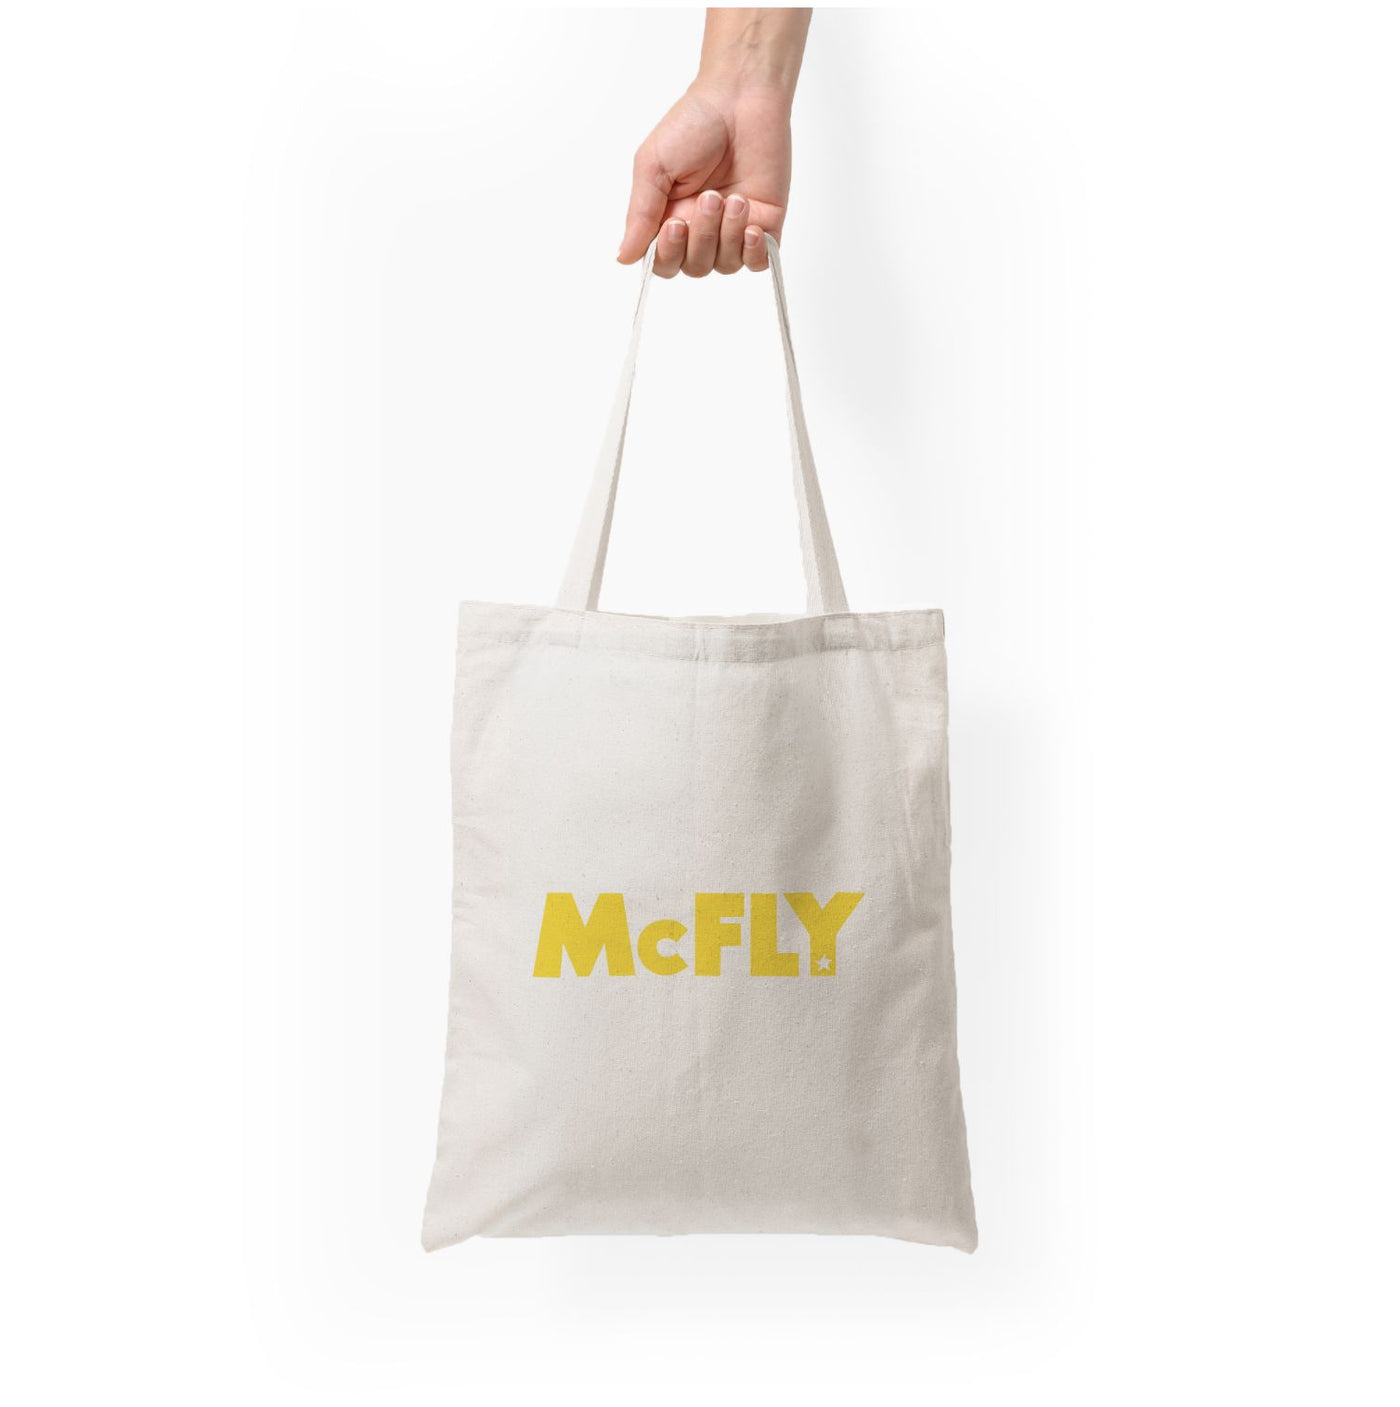 Blue And Yelllow - McFly Tote Bag